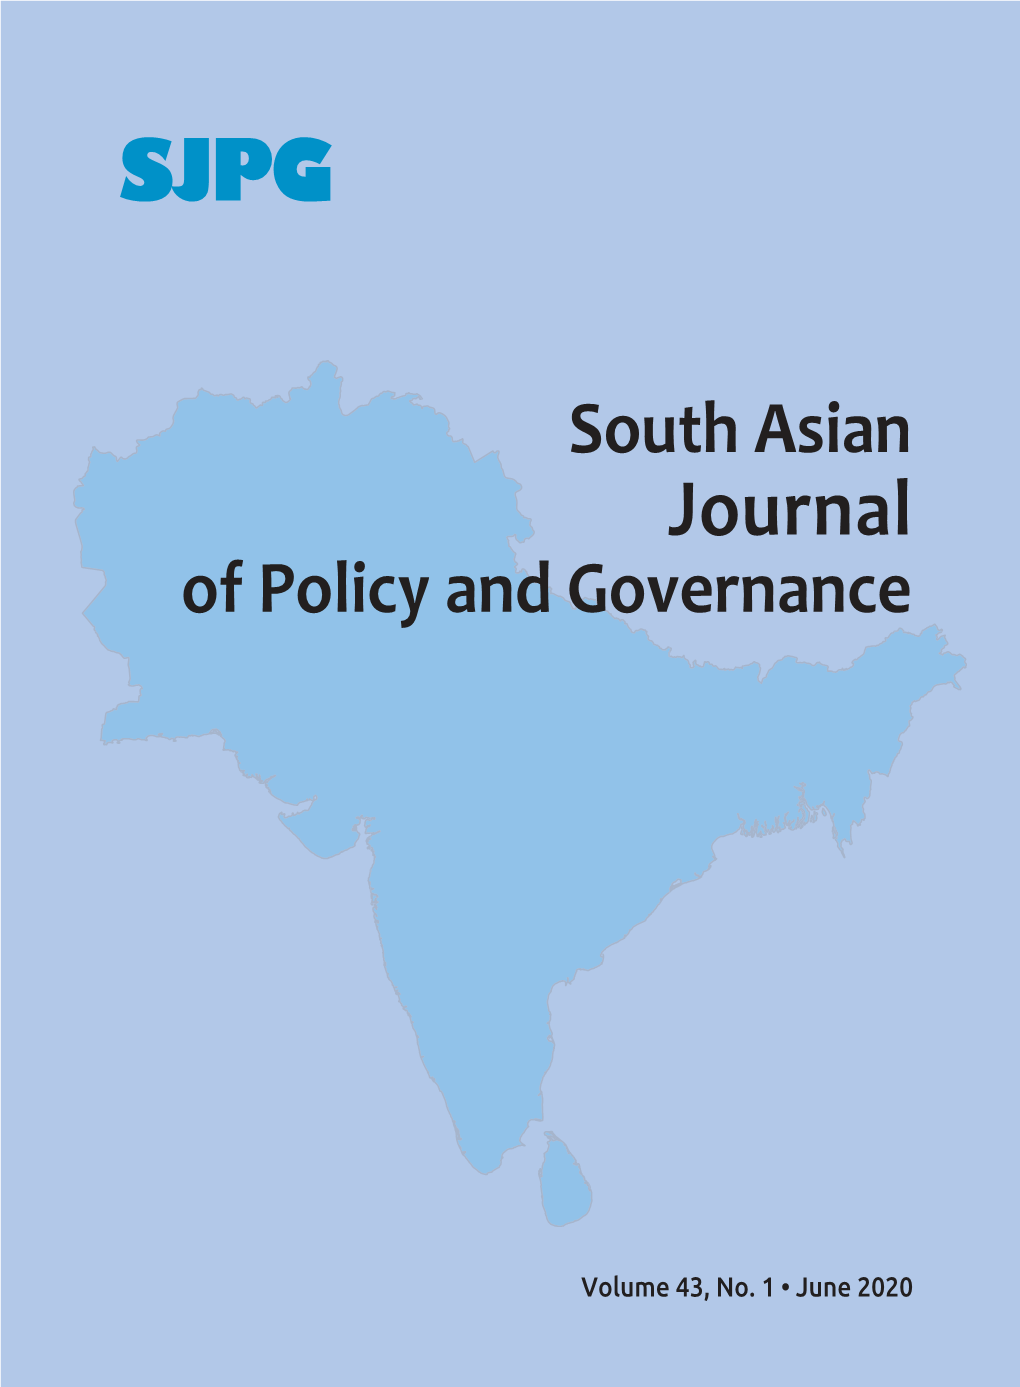 South Asian Journal of Policy and Governance